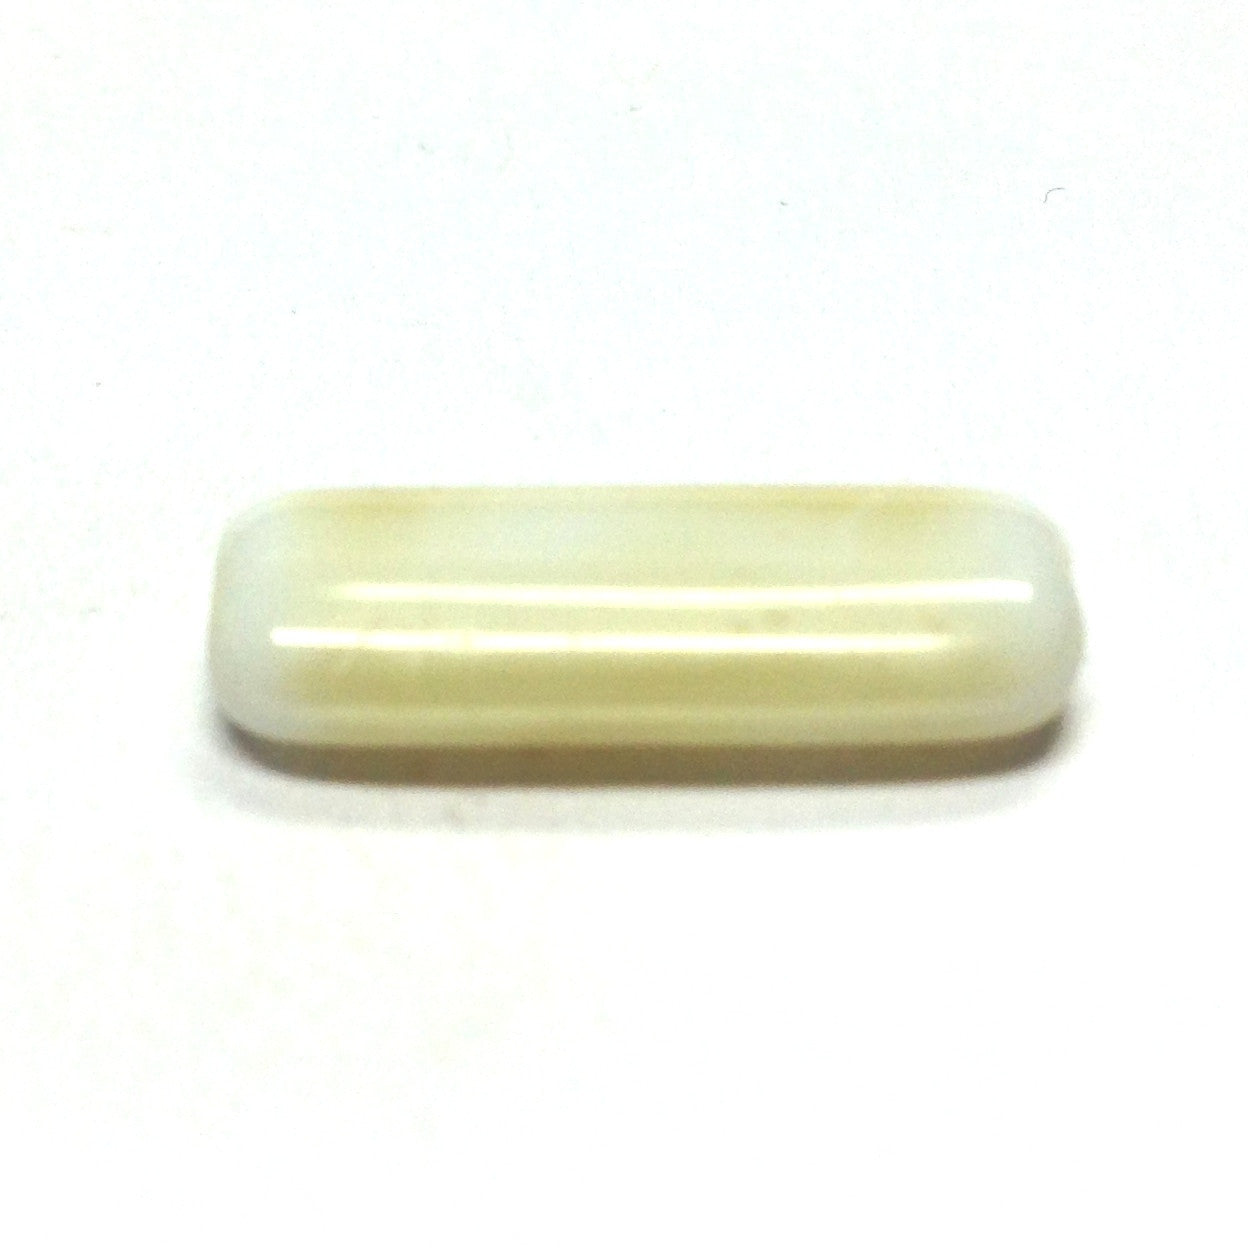 18X7MM Beige Glass Rectangle Bead (72 pieces)